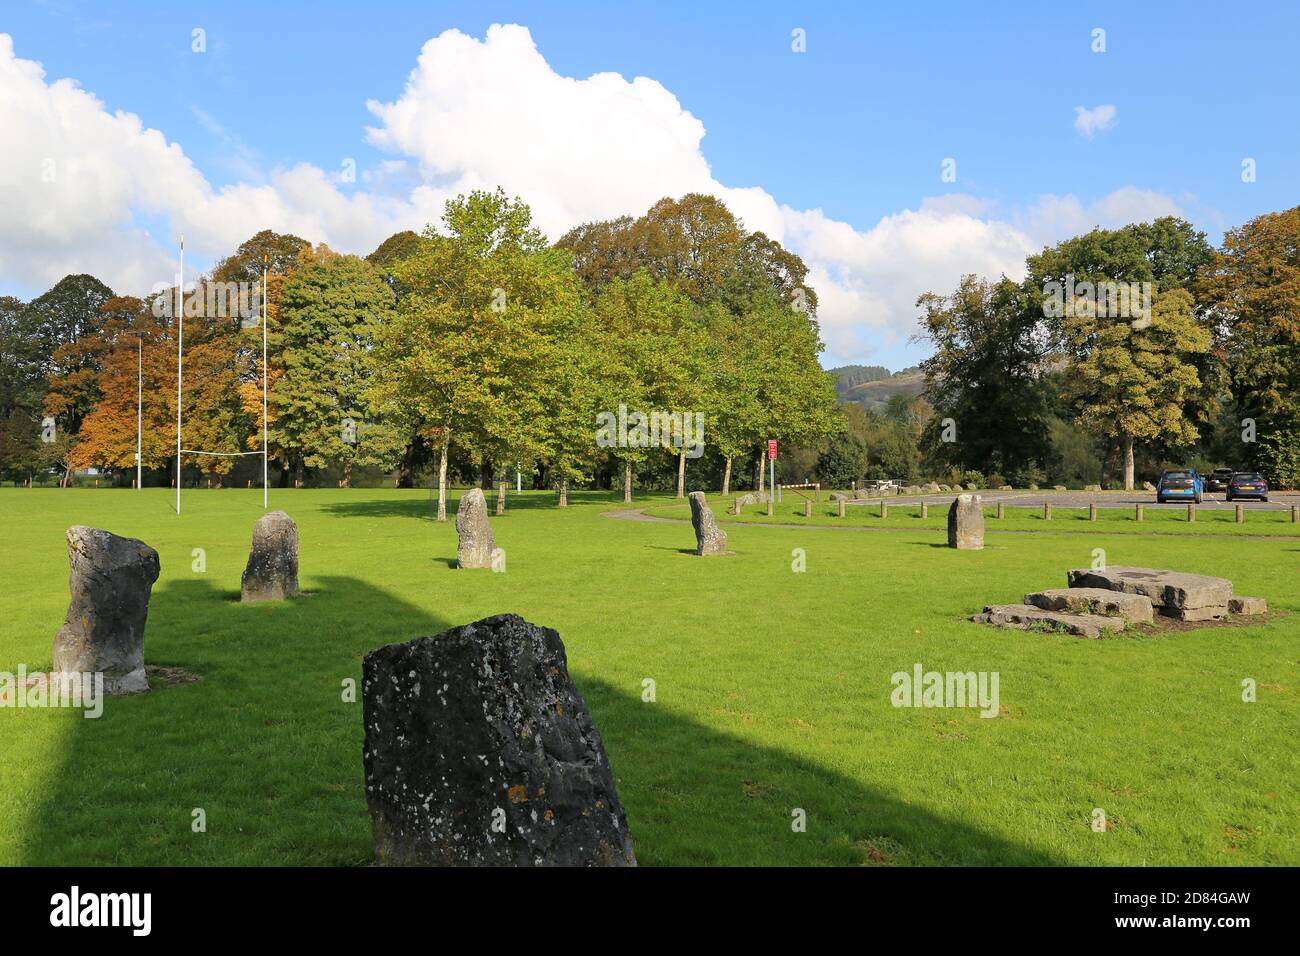 Gorsedd Stone Circle (erected for National Eisteddfod in 1993), Groe Park, Builth Wells, Brecknockshire, Powys, Wales, Great Britain, UK, Europe Stock Photo